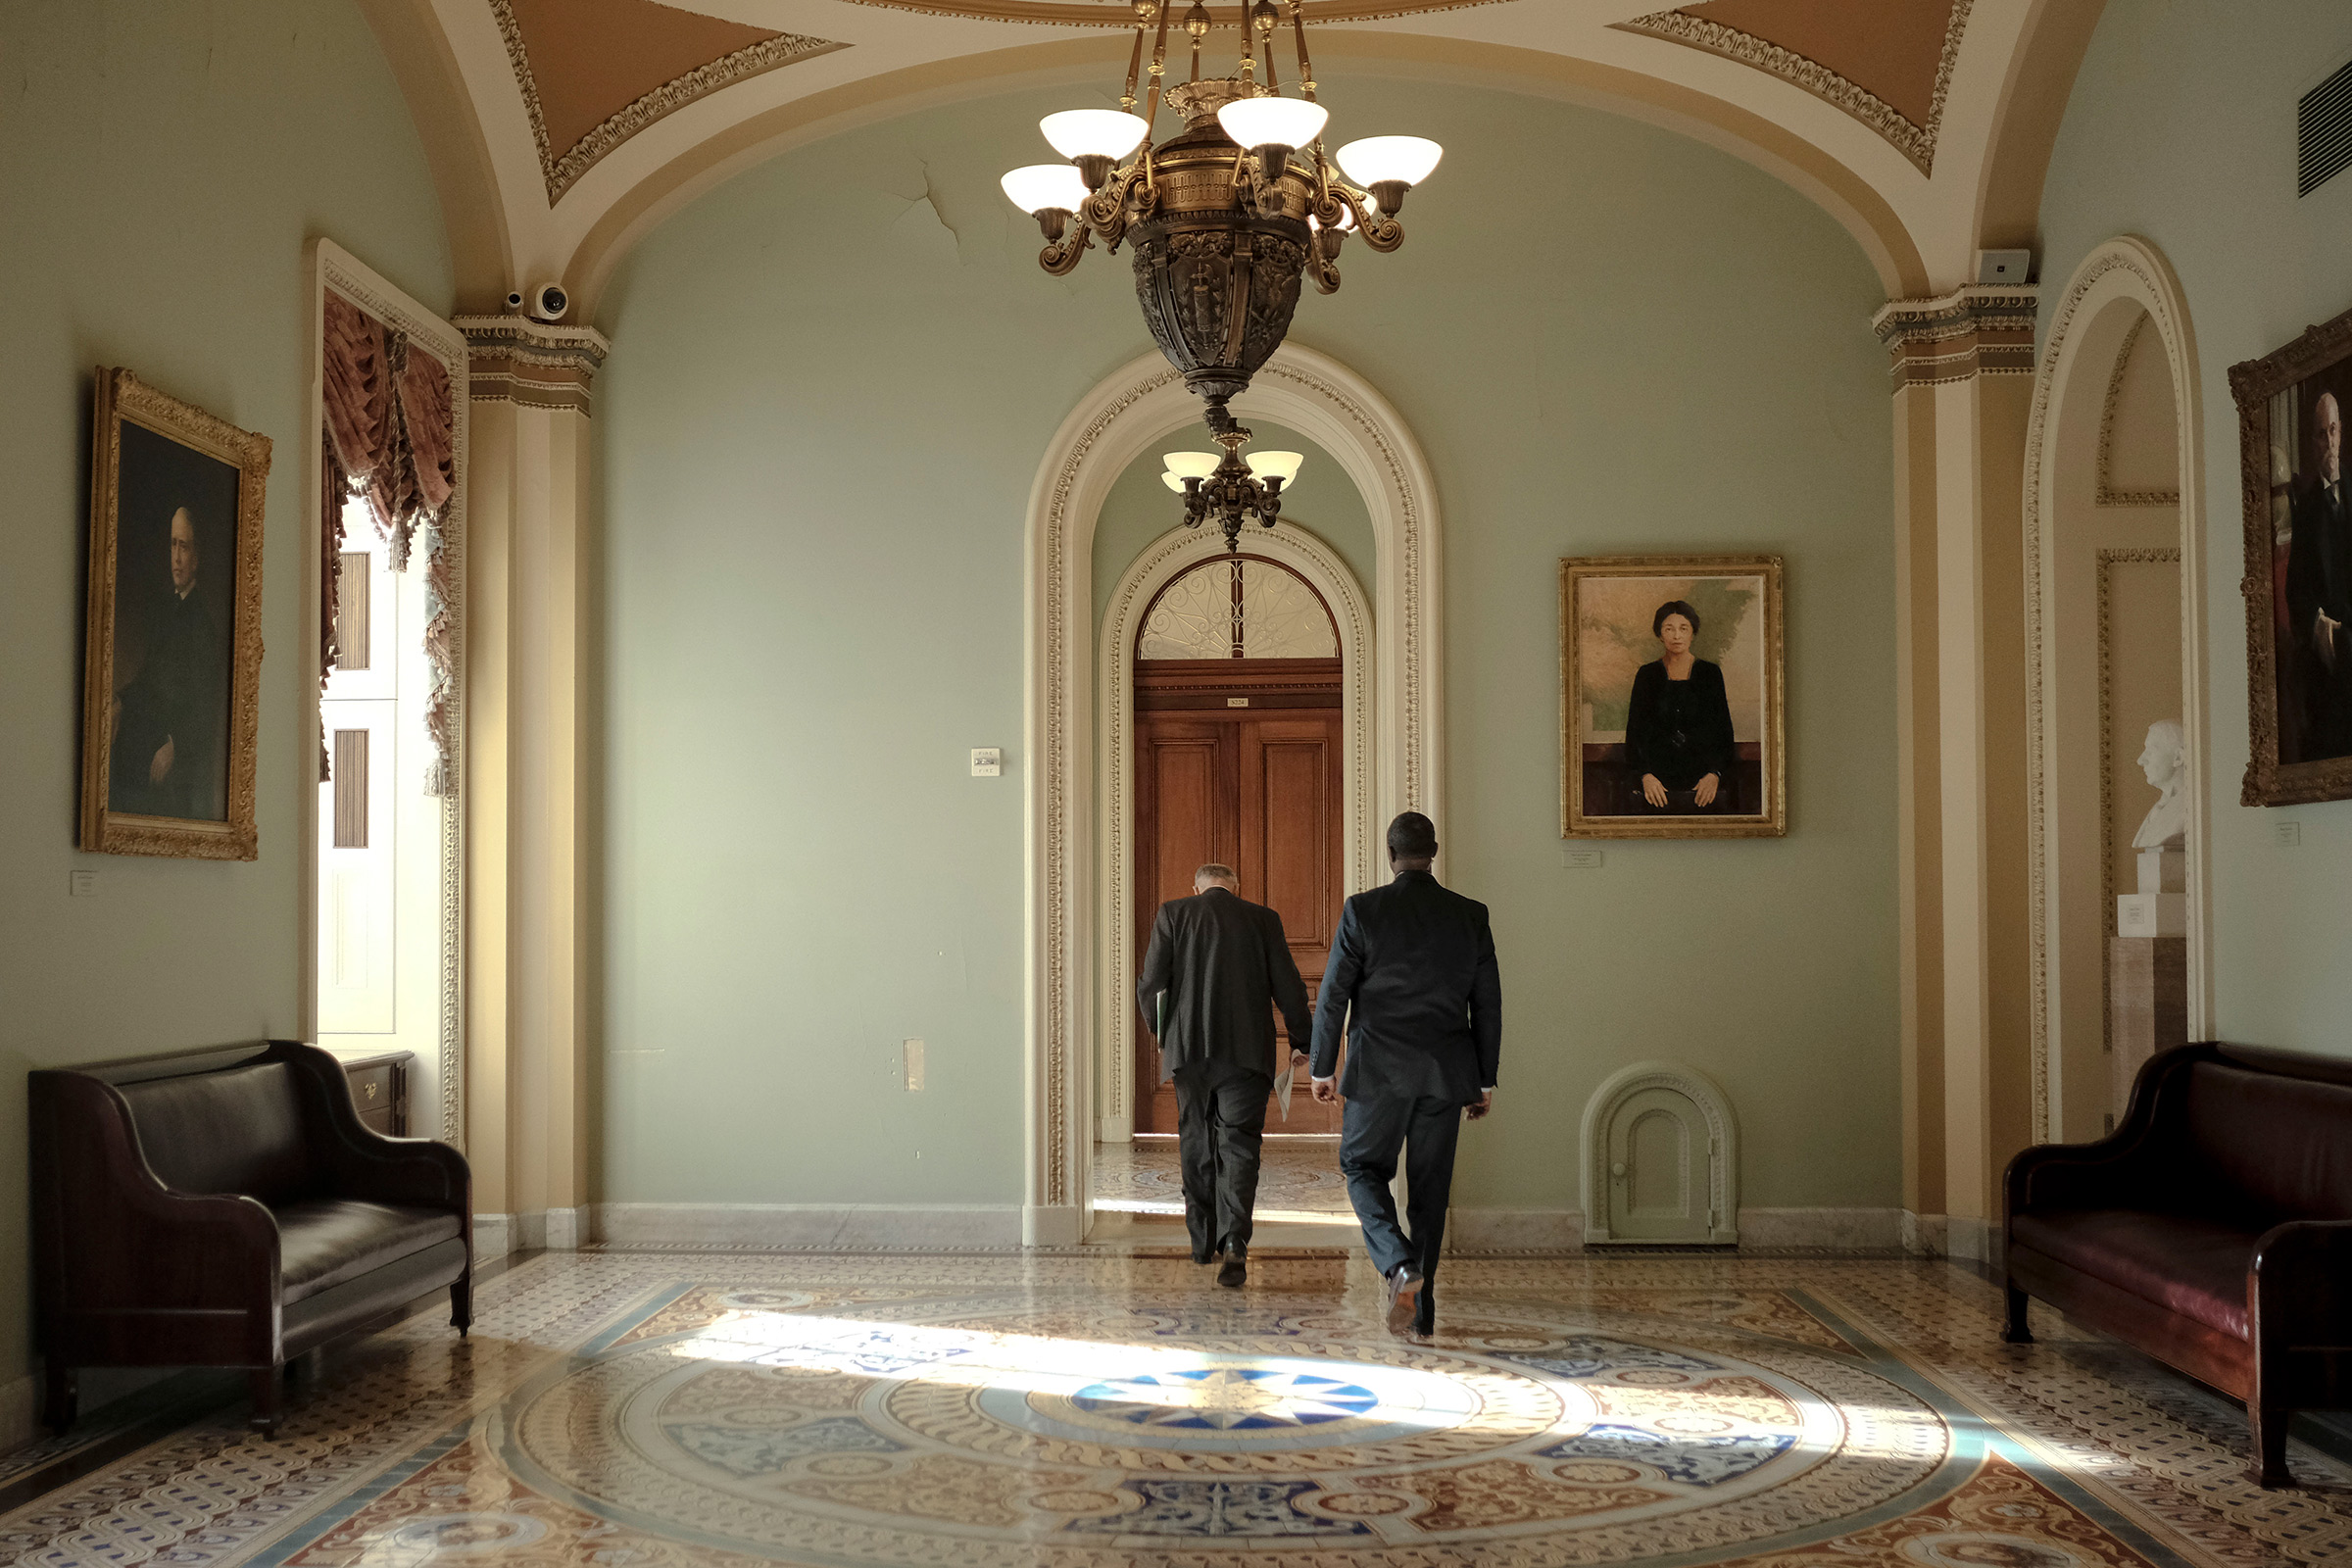 Senate Minority Leader Chuck Schumer (D-N.Y.) walks to his office before the articles of impeachment are transferred to the senate at the Capitol in Washington, D.C., on Jan. 15, 2020. (Gabriella Demczuk for TIME)